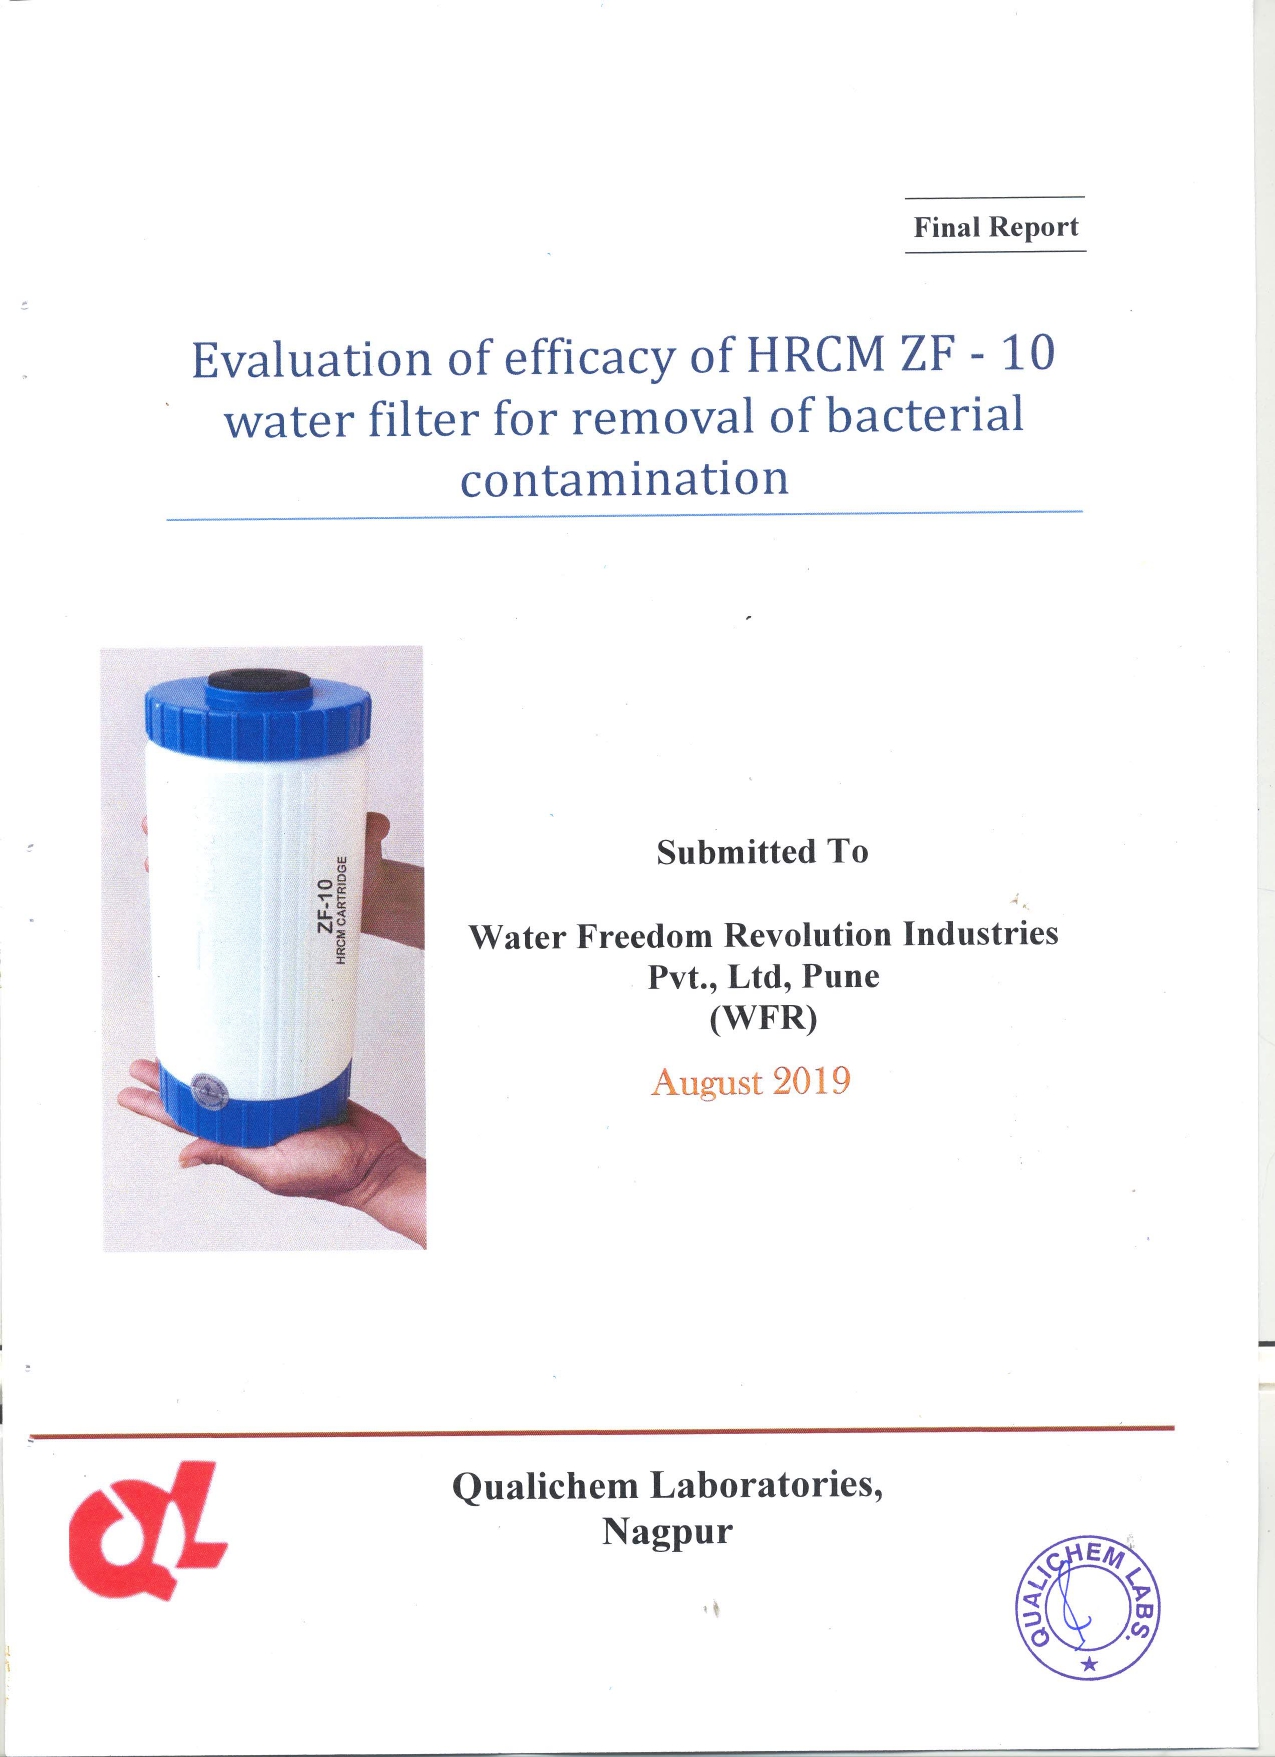 Evaluation of efficacy of HRCM ZF-10 water filter for removal of bacterial contamination.